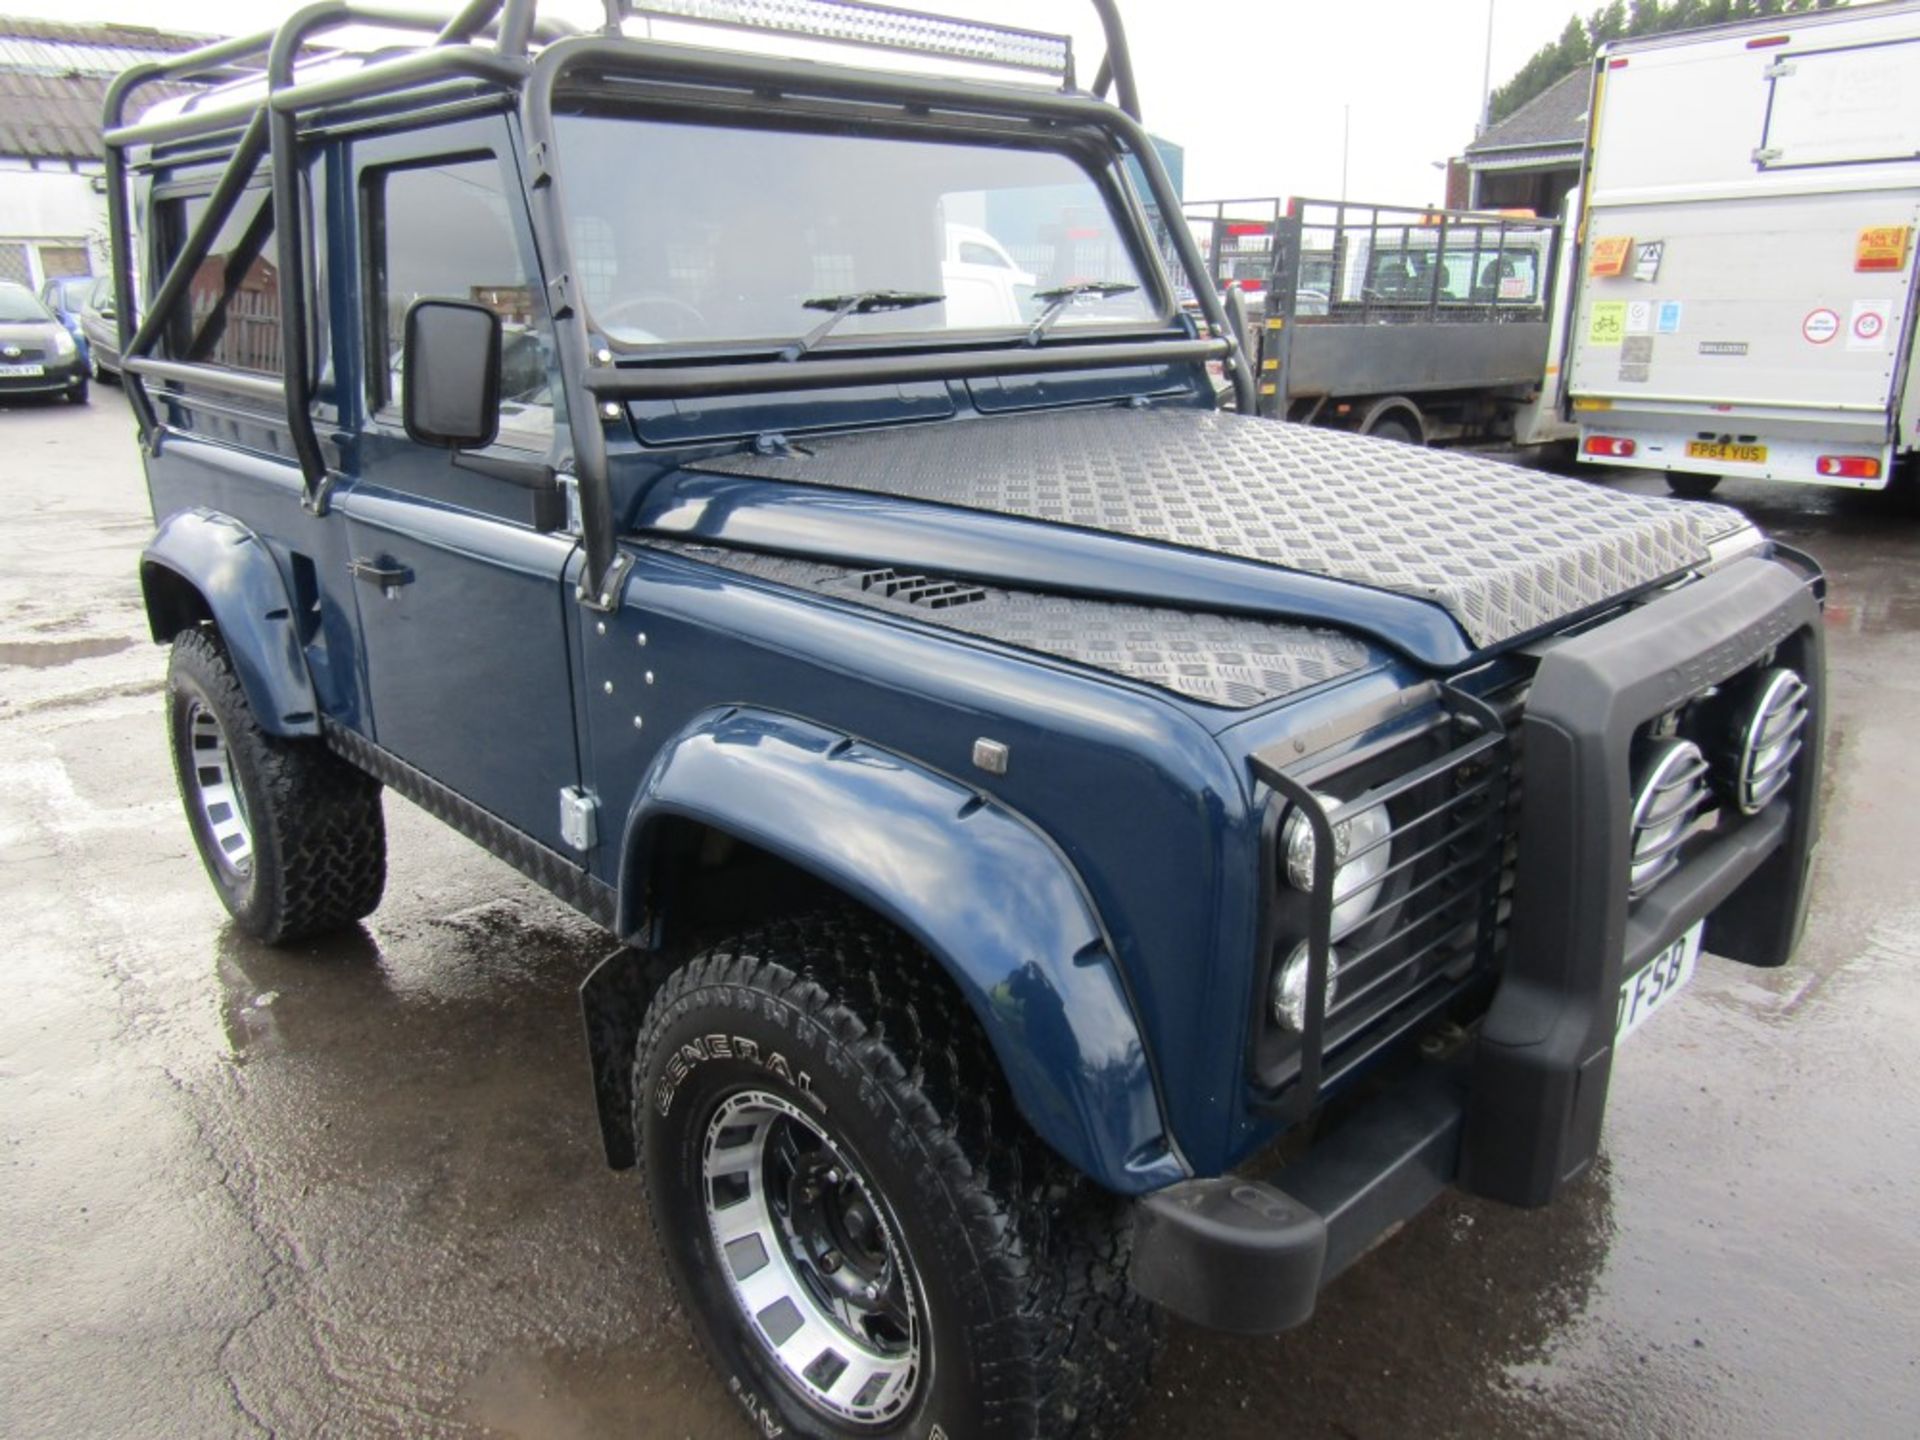 G reg LAND ROVER 90 4C SW DT DIESEL 4 X 4, NEW GALV CHASSIS, 300 TDI ENGINE, 200 GEARBOX, NEW DOORS,